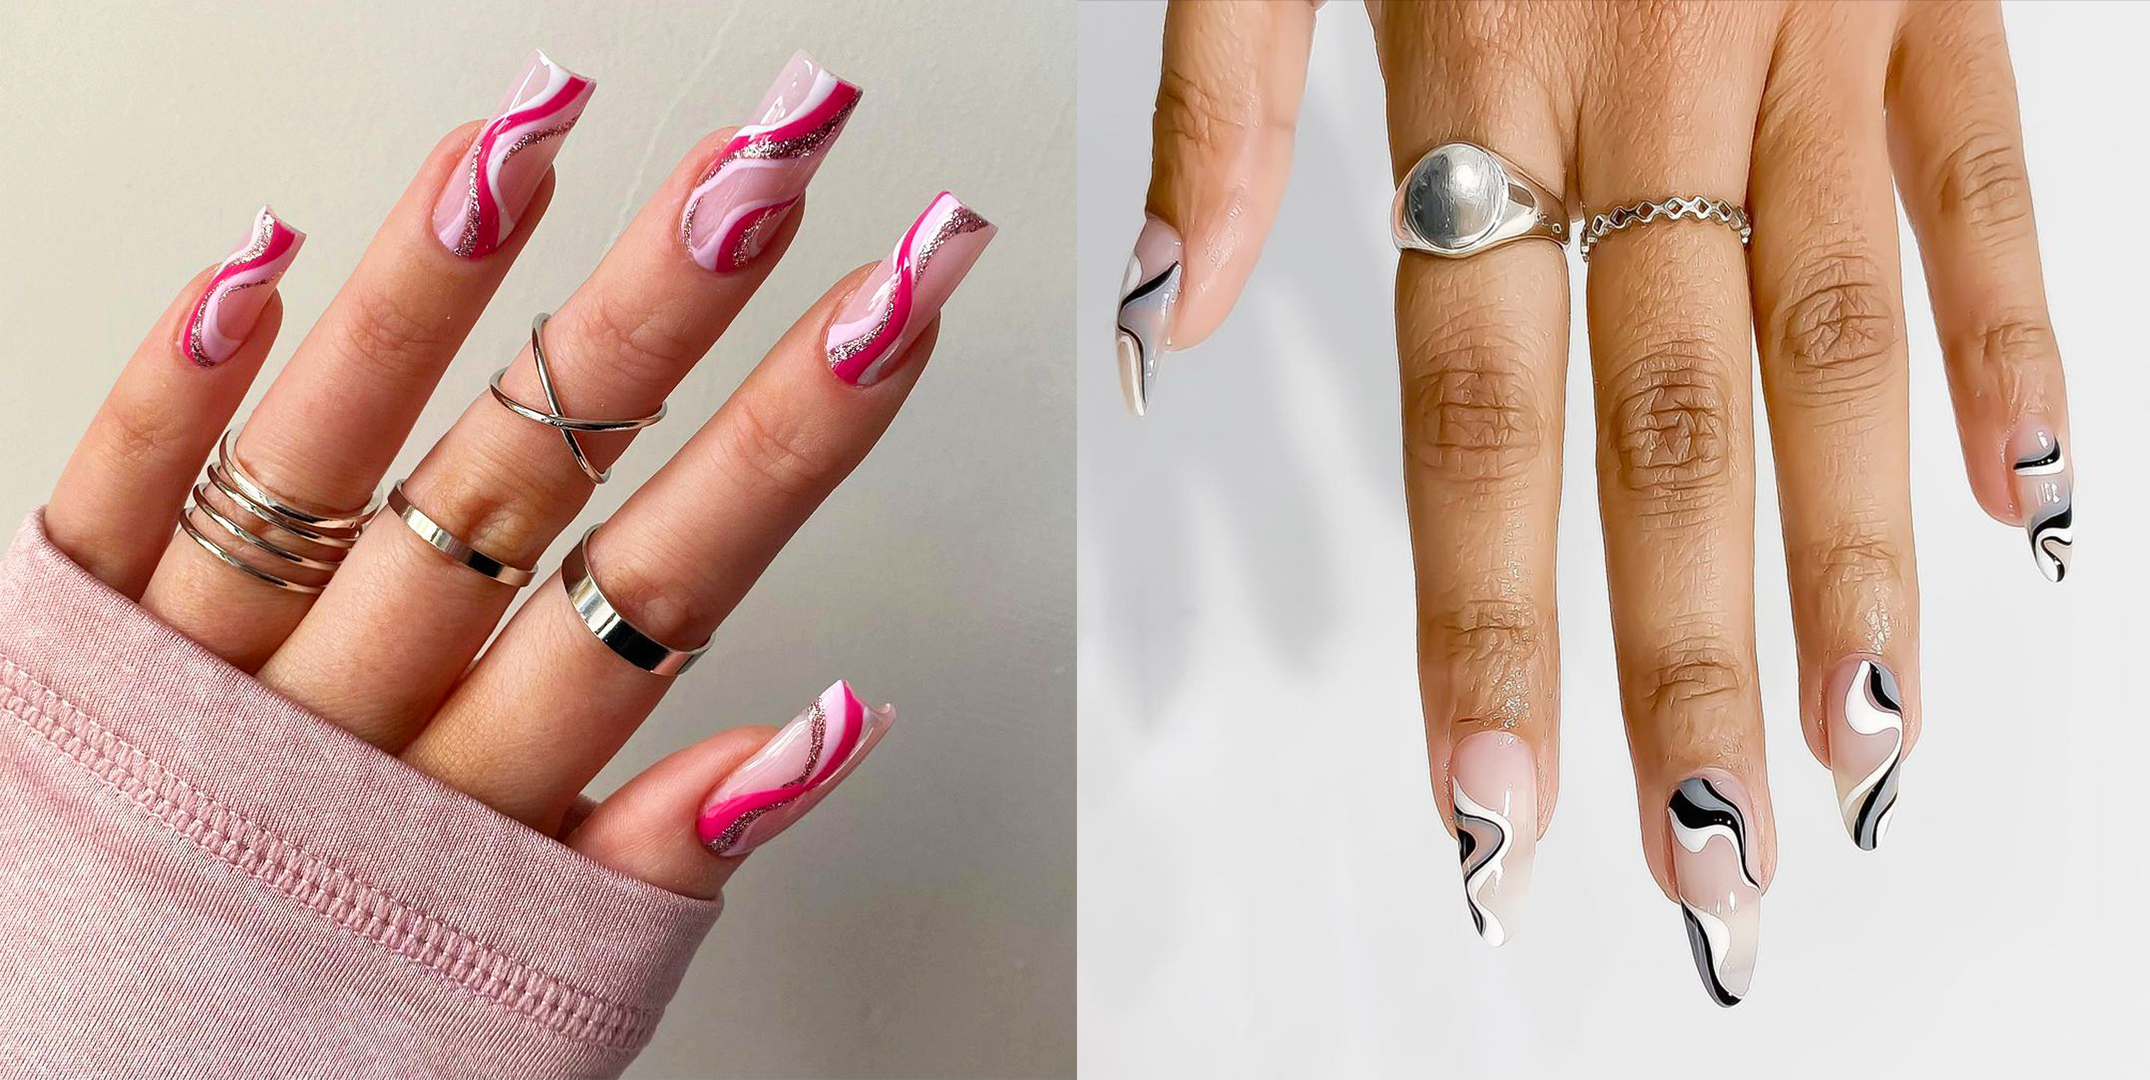 2 DIY Summer Nail Designs to Try at Home | First For Women